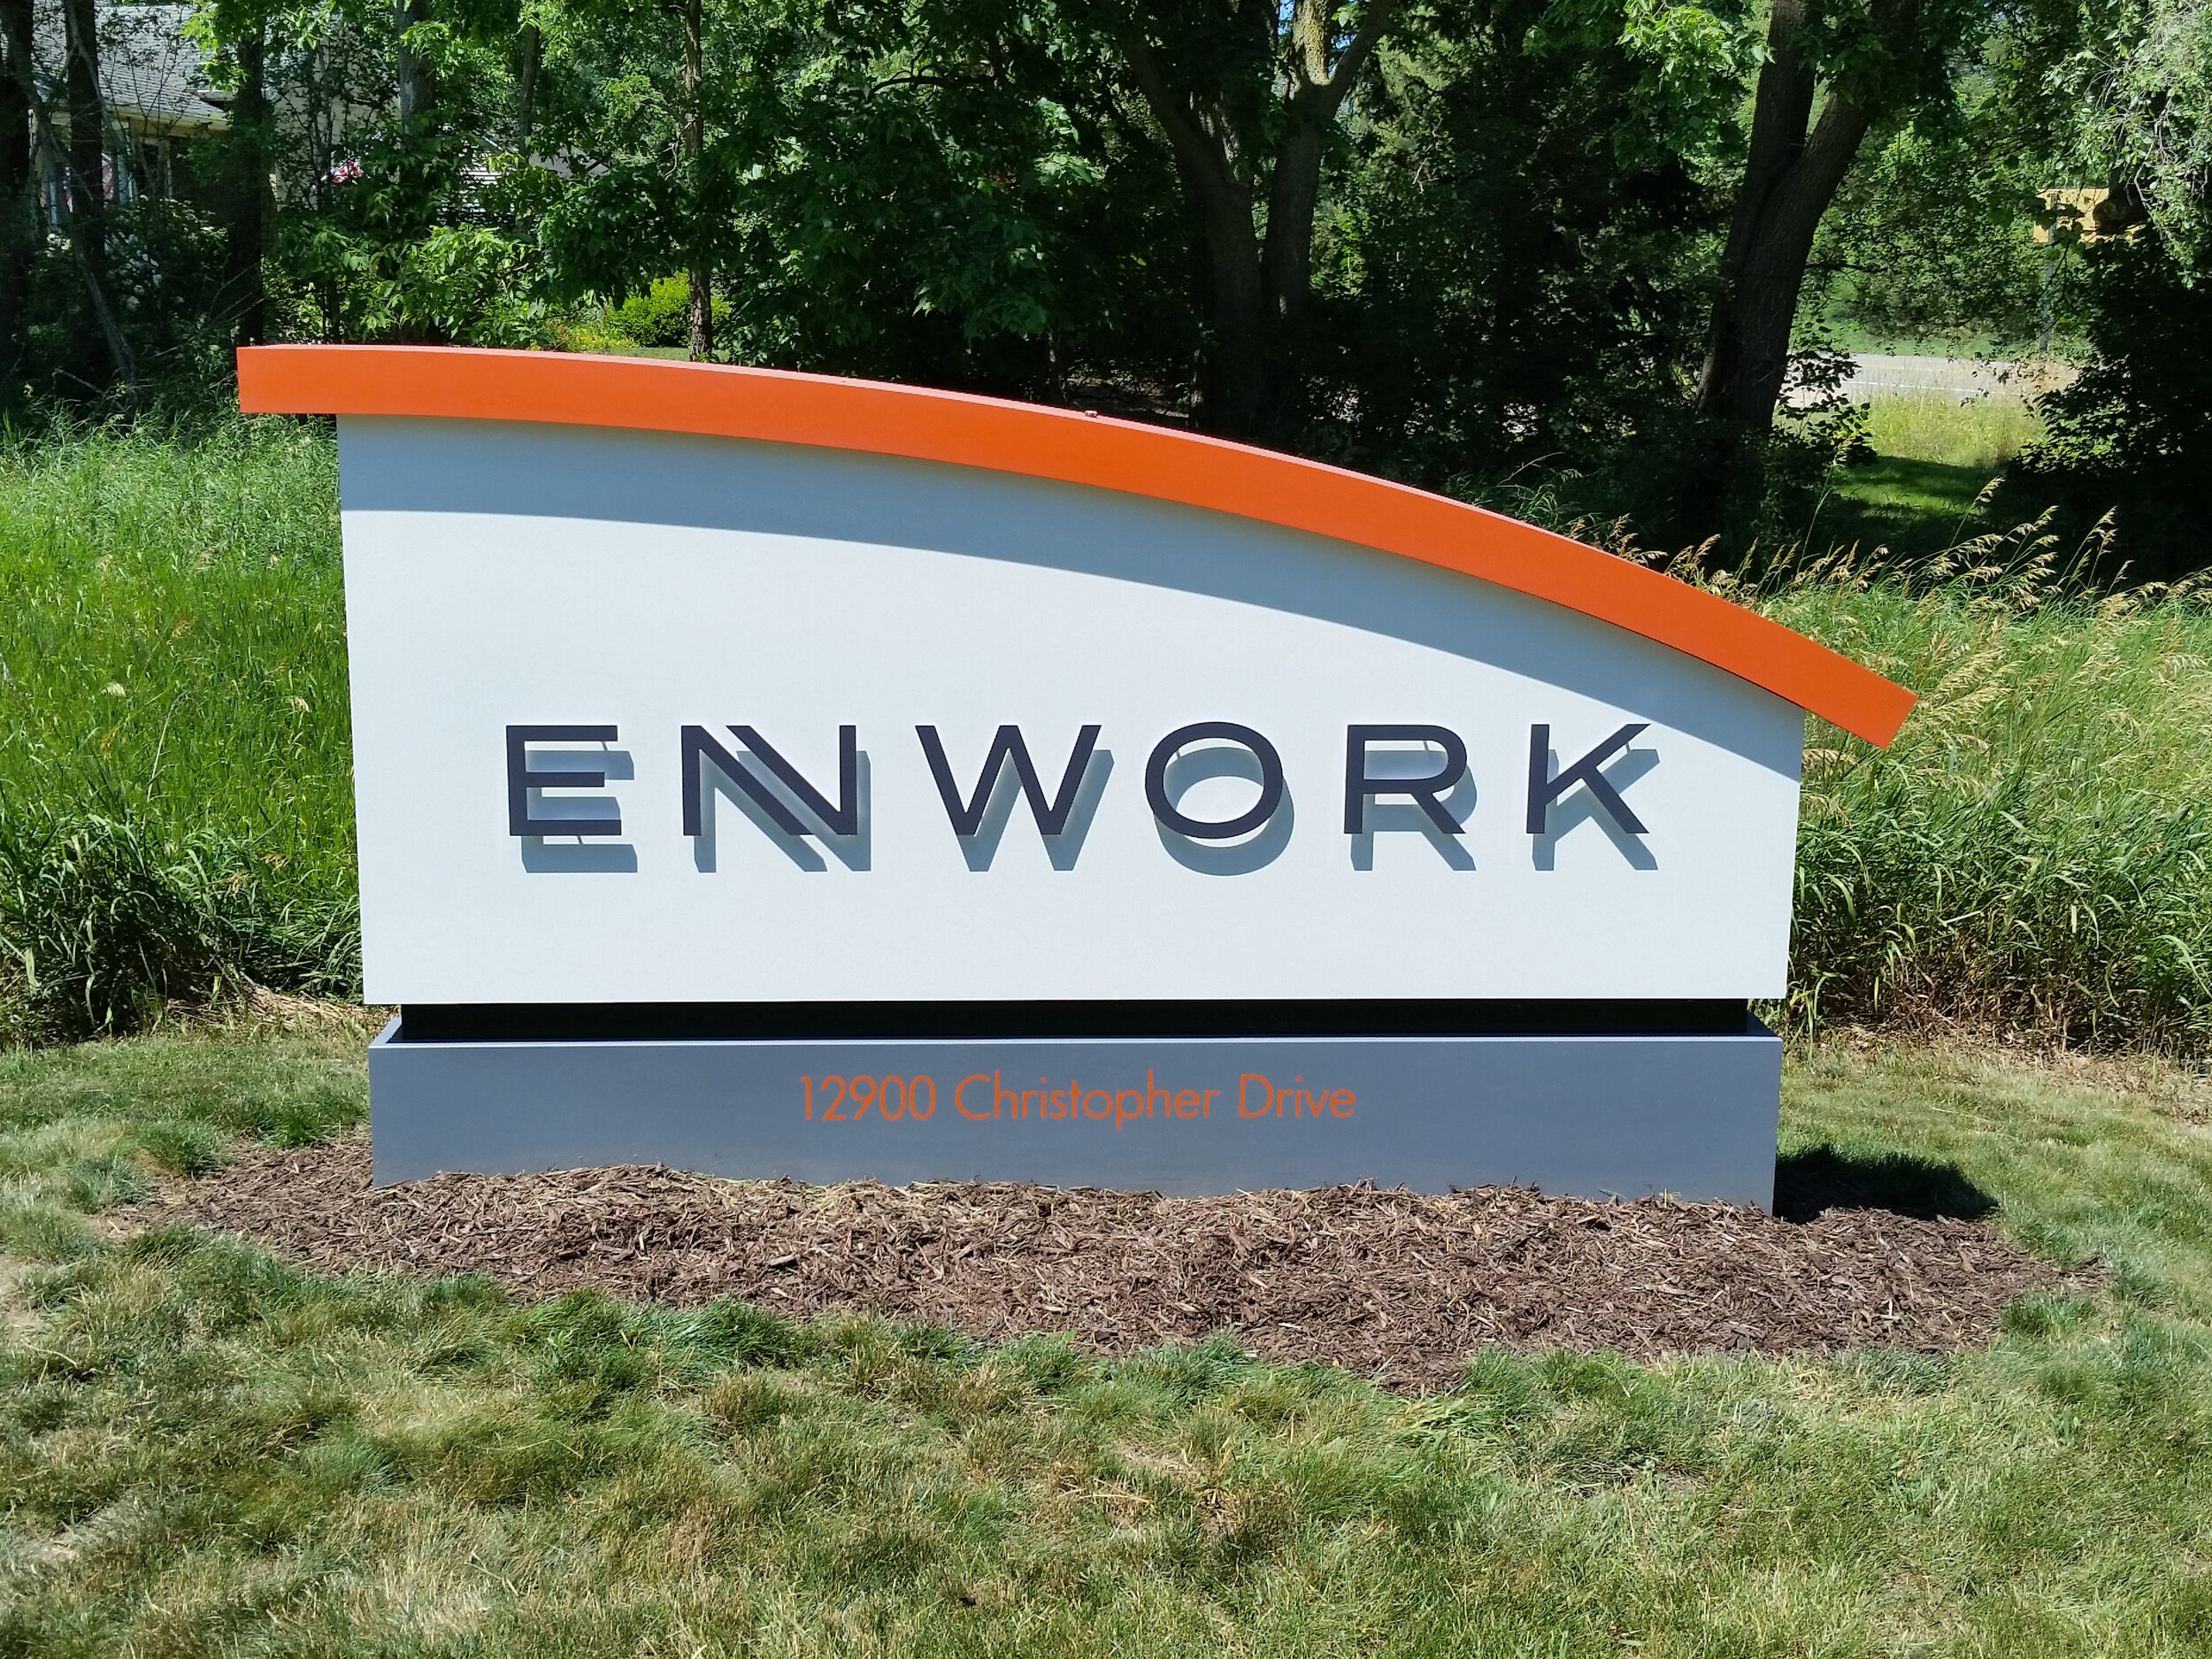  Custom aluminum fabricated monument sign with CNC routed plate aluminum lettering and an arched top. 